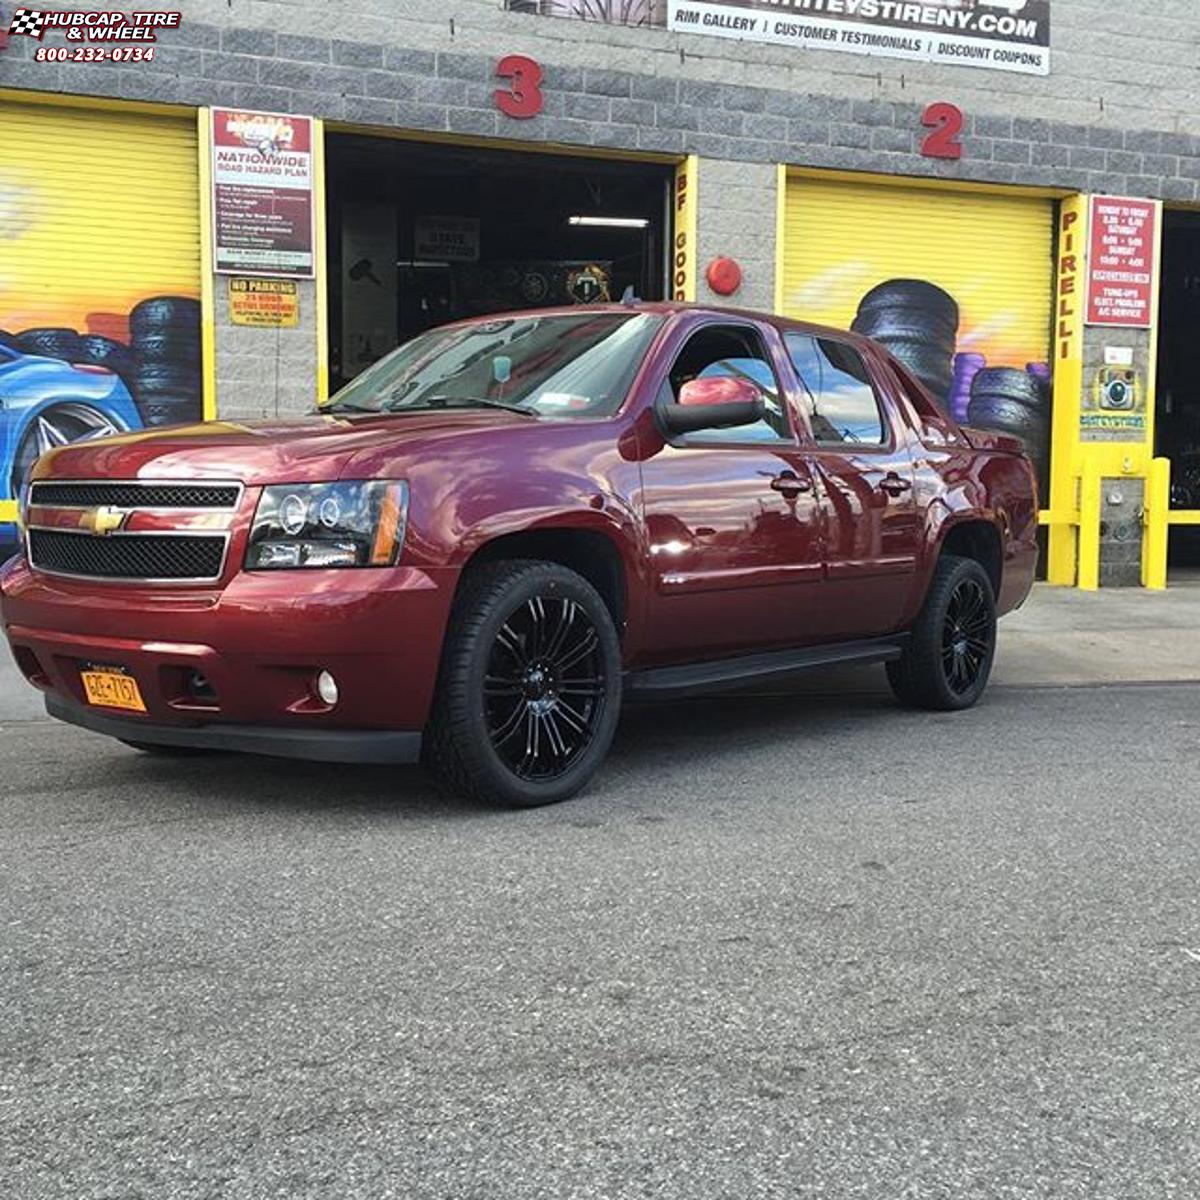 vehicle gallery/chevrolet avalanche xd series km677 d2  Gloss Black wheels and rims